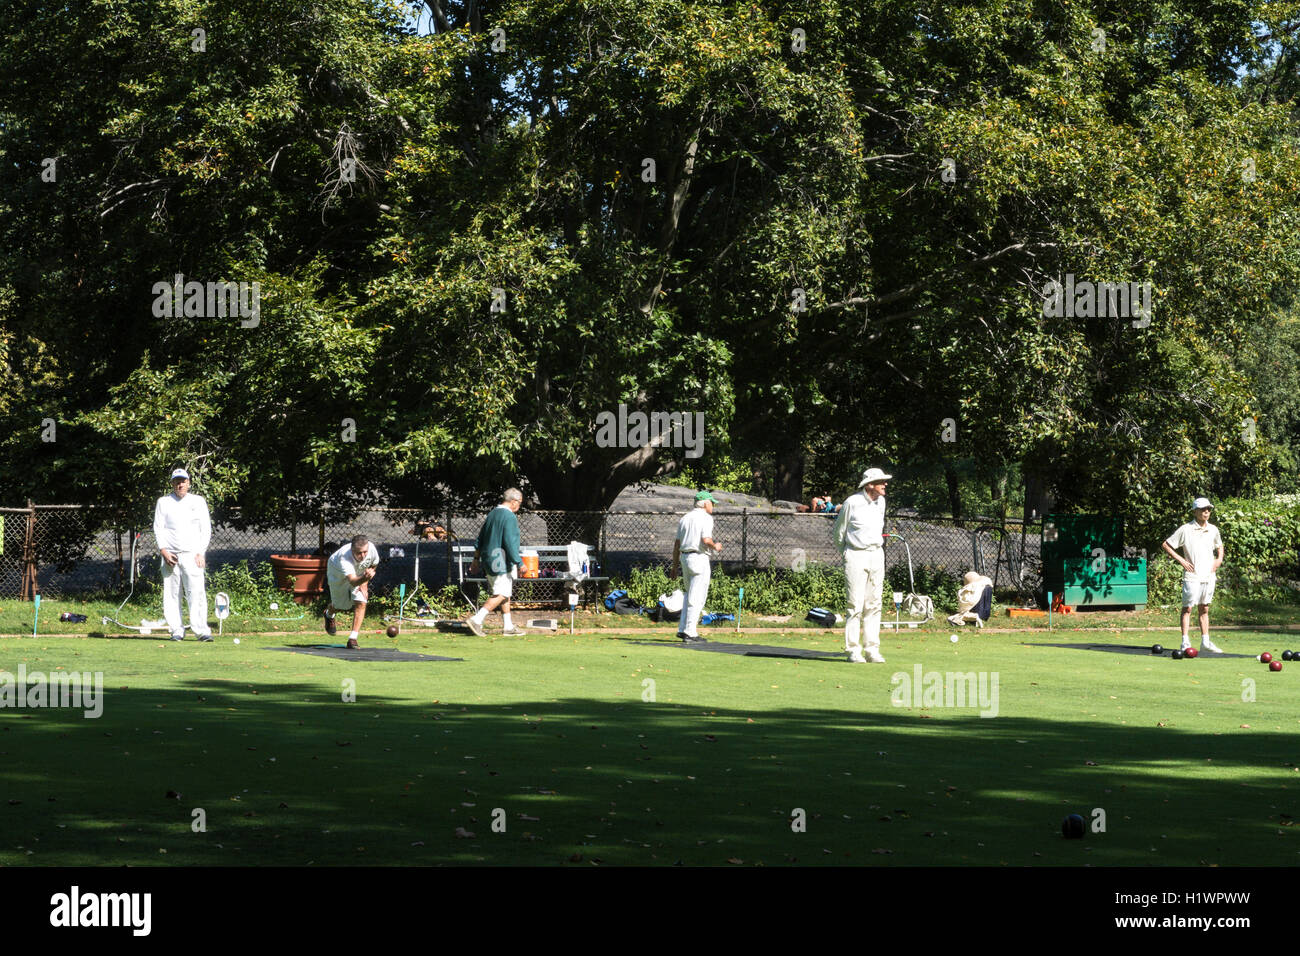 New York Lawn Bowling Club, Central Park, NYC, USA Stock Photo